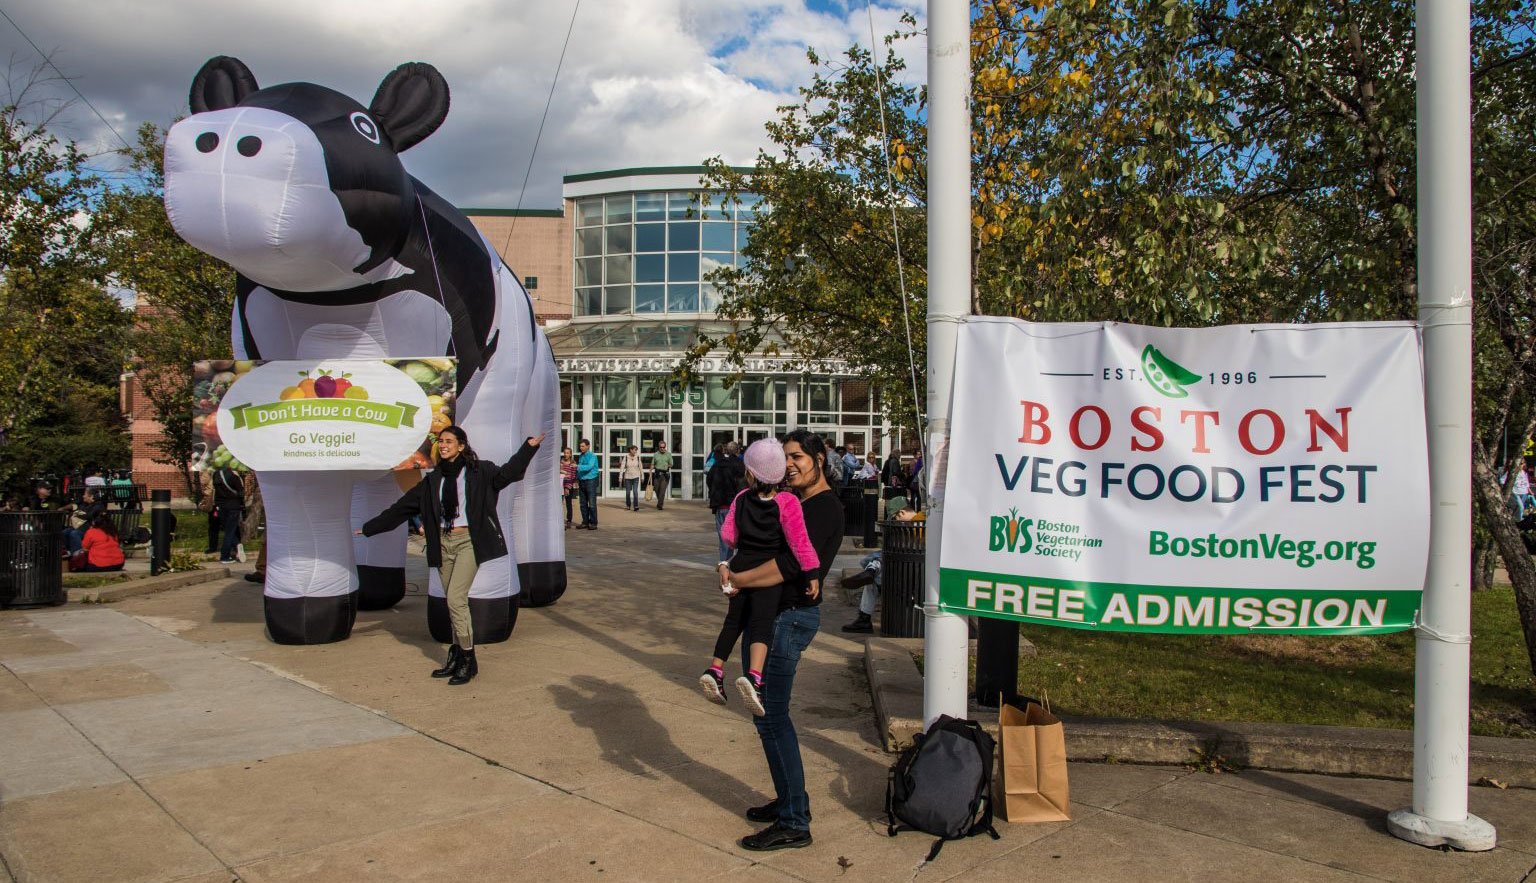 giant inflatable cow at the entrance to the Reggie Lewis Center for Food Fest